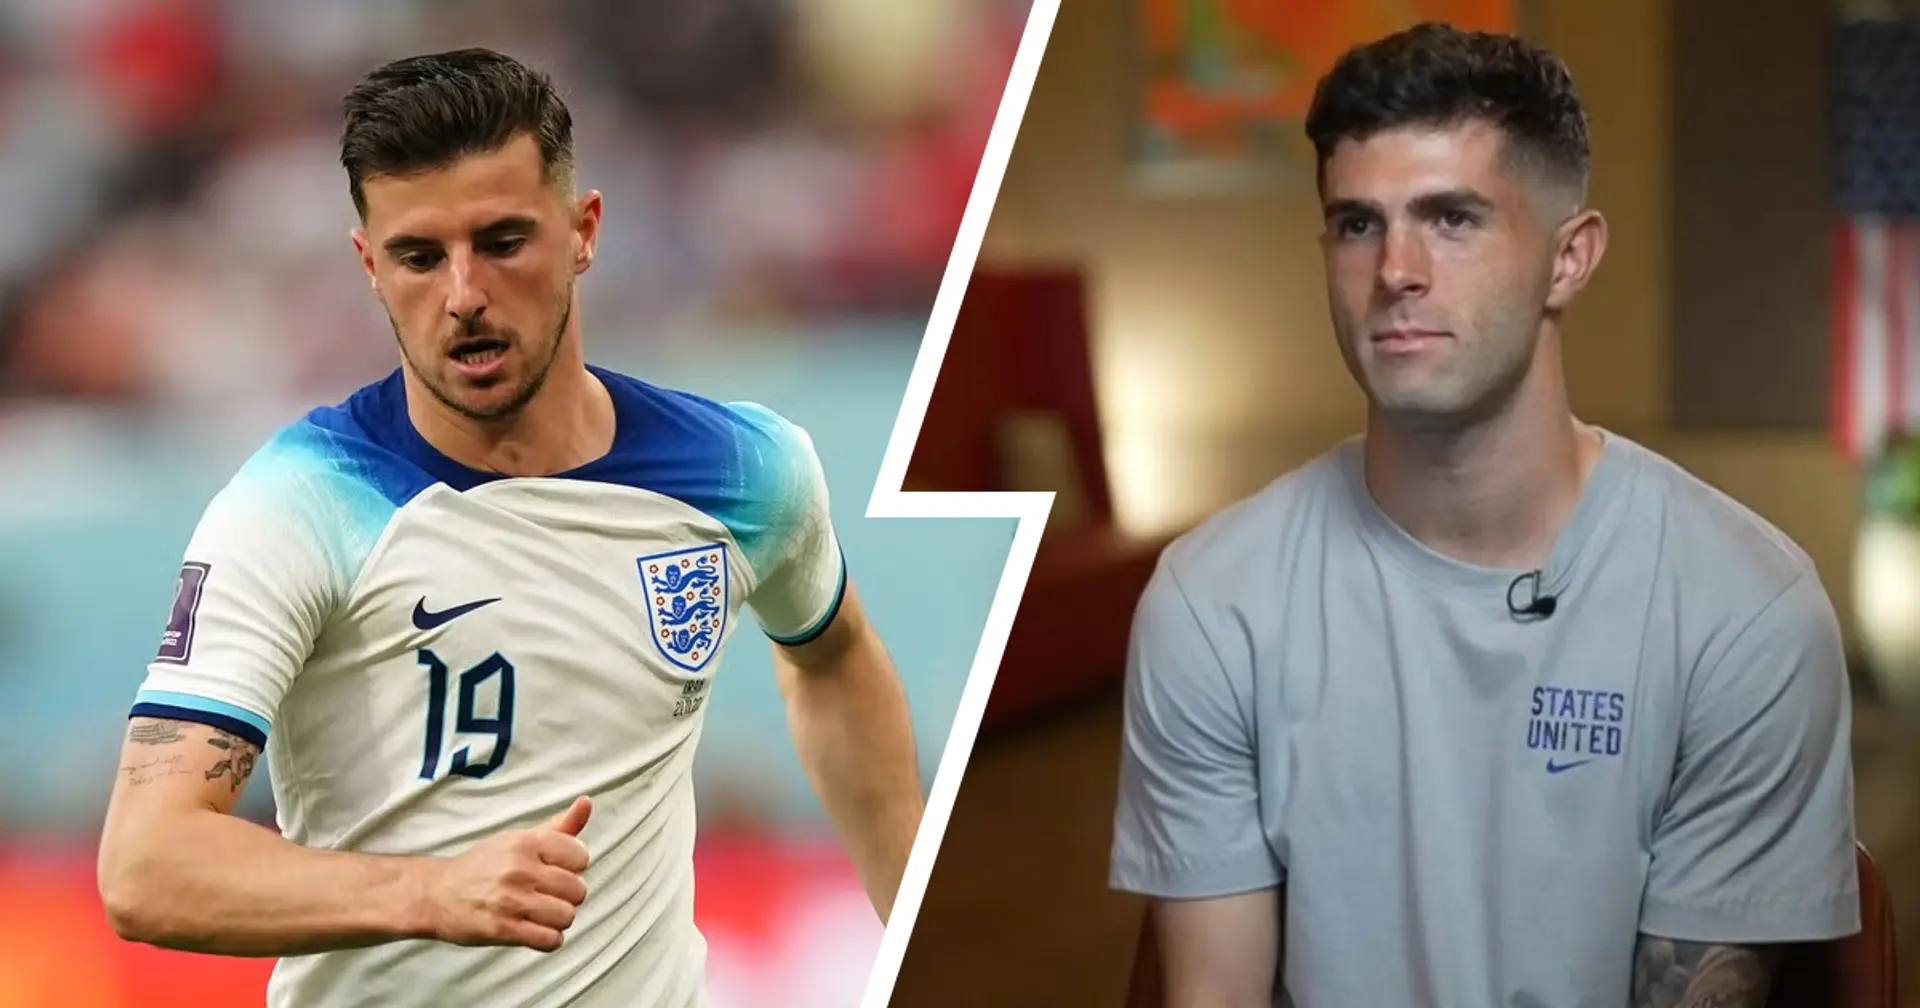 'We’re going to go in, be aggressive': Pulisic looks forward to facing Chelsea teammates in England vs USA